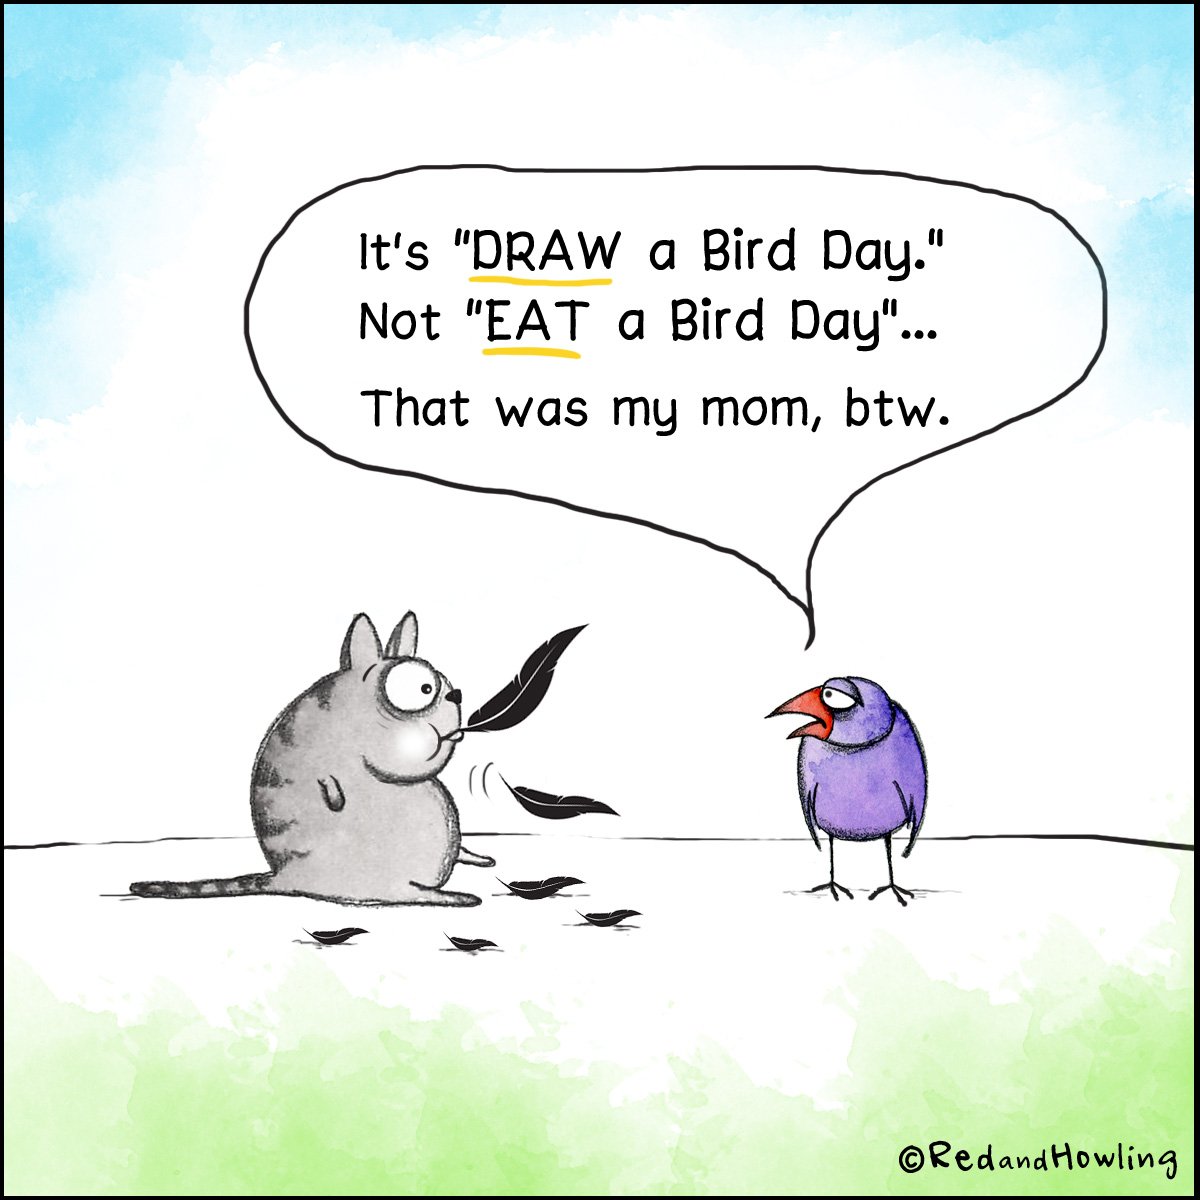 Cat Game - Today is Draw a Bird Day! Today take some time